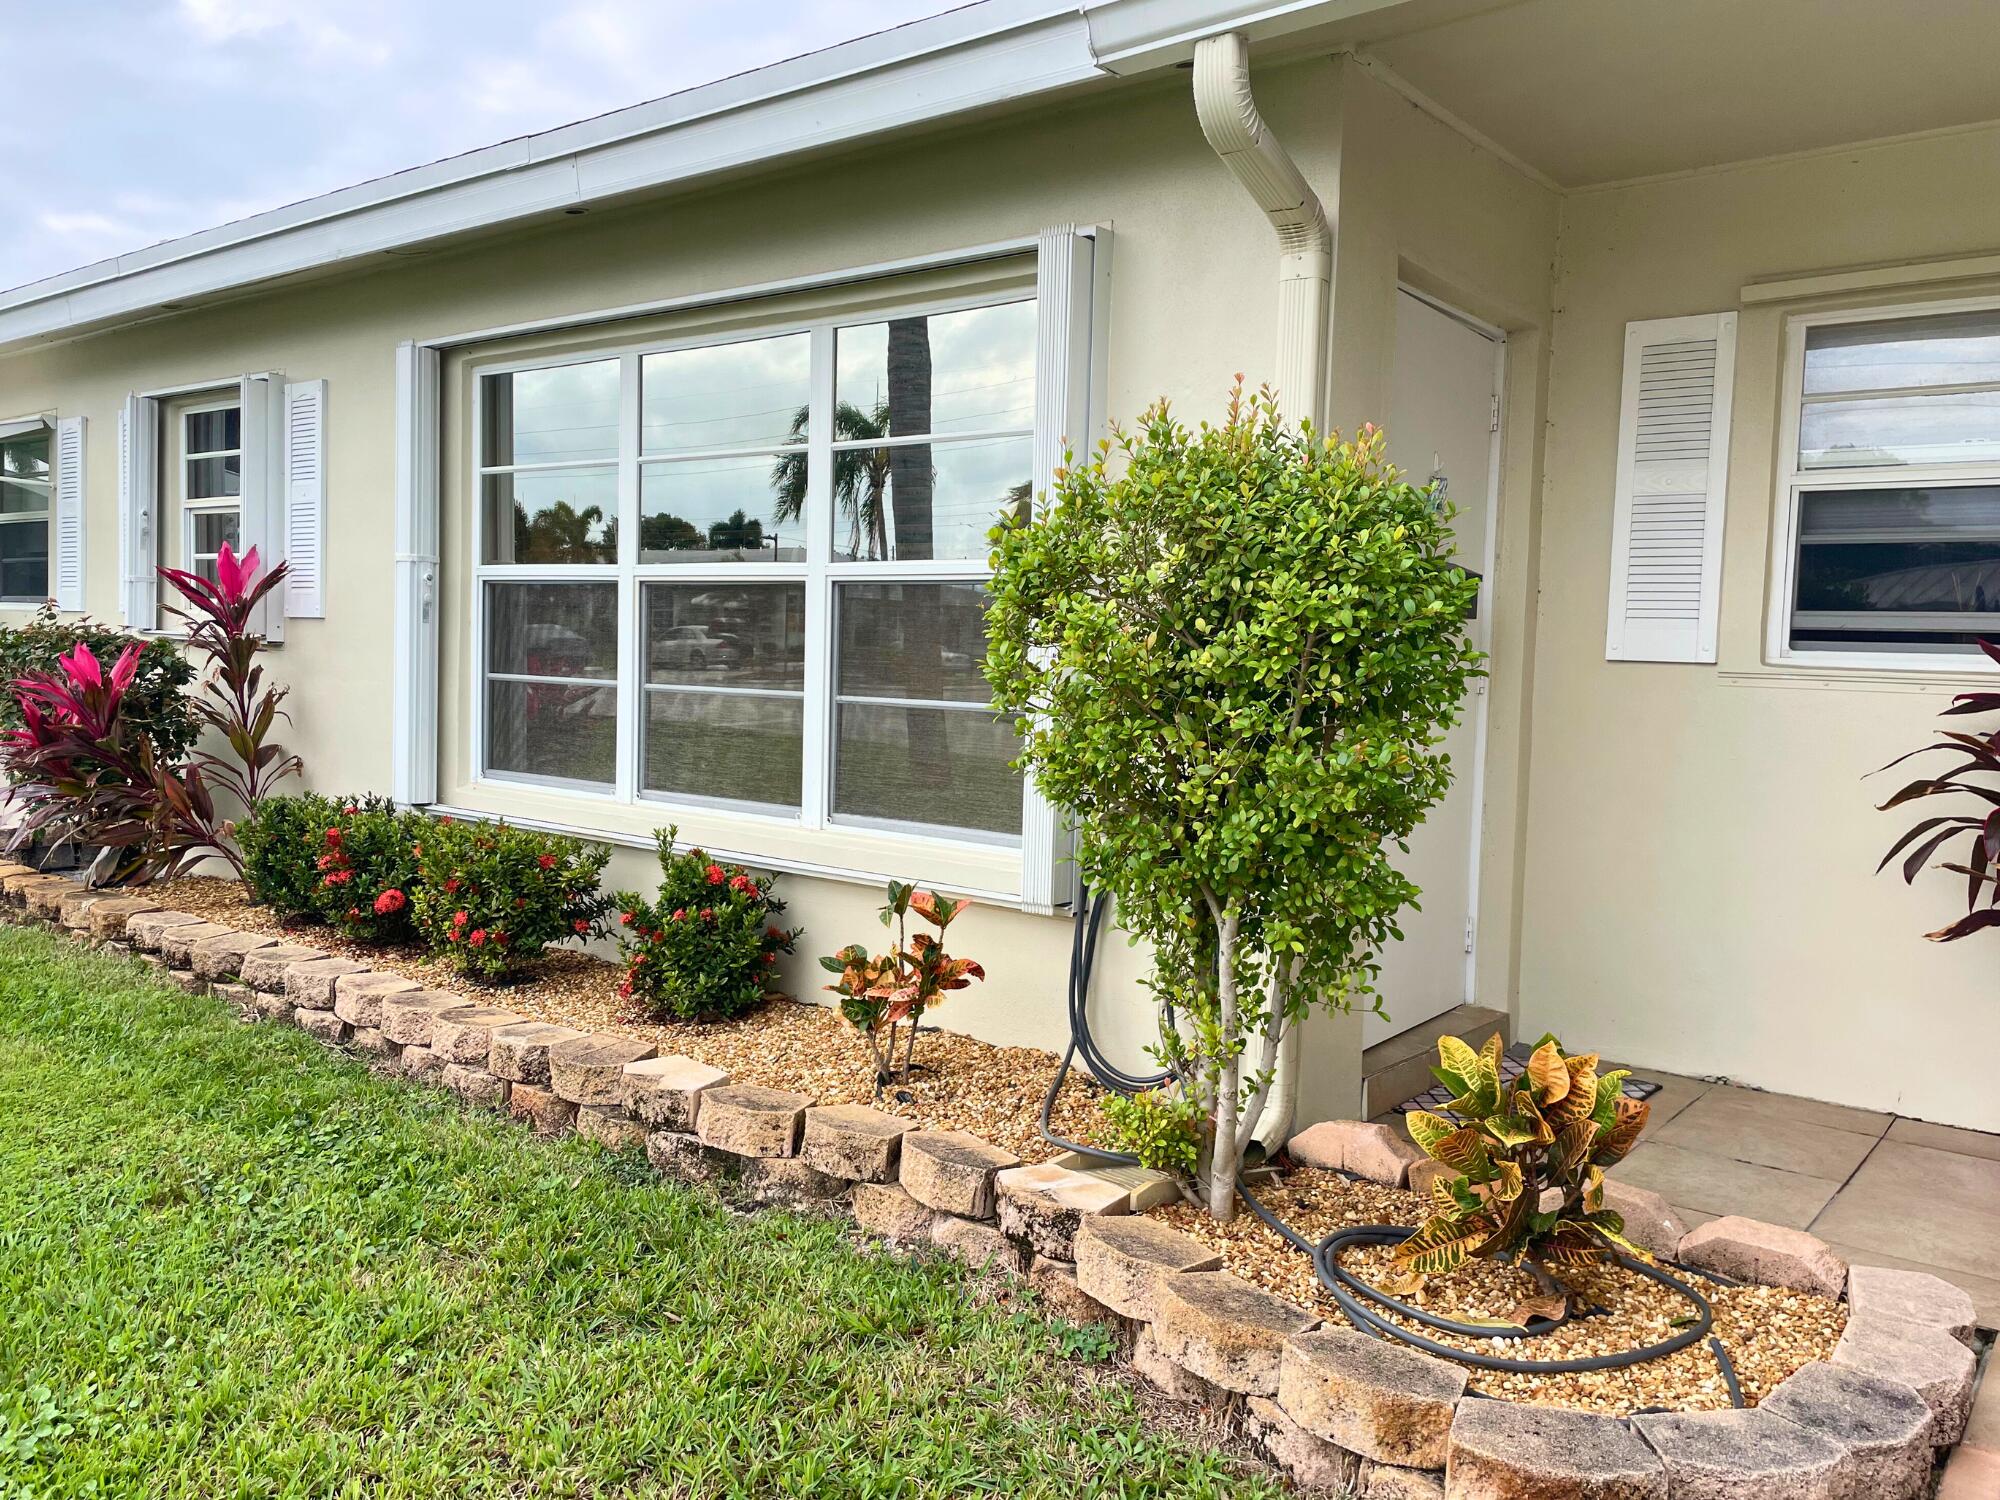 Discover this hidden little gem that could be your perfect home in Boynton Beach's Pine Point Villas subdivision with this charming unit, it can be turnkey or put all your own touches on this one-bedroom 1.5 bath. Spanning 880 square feet, a very well-maintained property featuring laminate and tile flooring, updated kitchen and baths which brings both comfort and convenience.The villa's ideal location across from the community pool adds to its appeal, providing a beautiful view and easy access to relaxation. Whether as a winter getaway or a full-time residence, this villa is ready for you to move in and enjoy immediately.